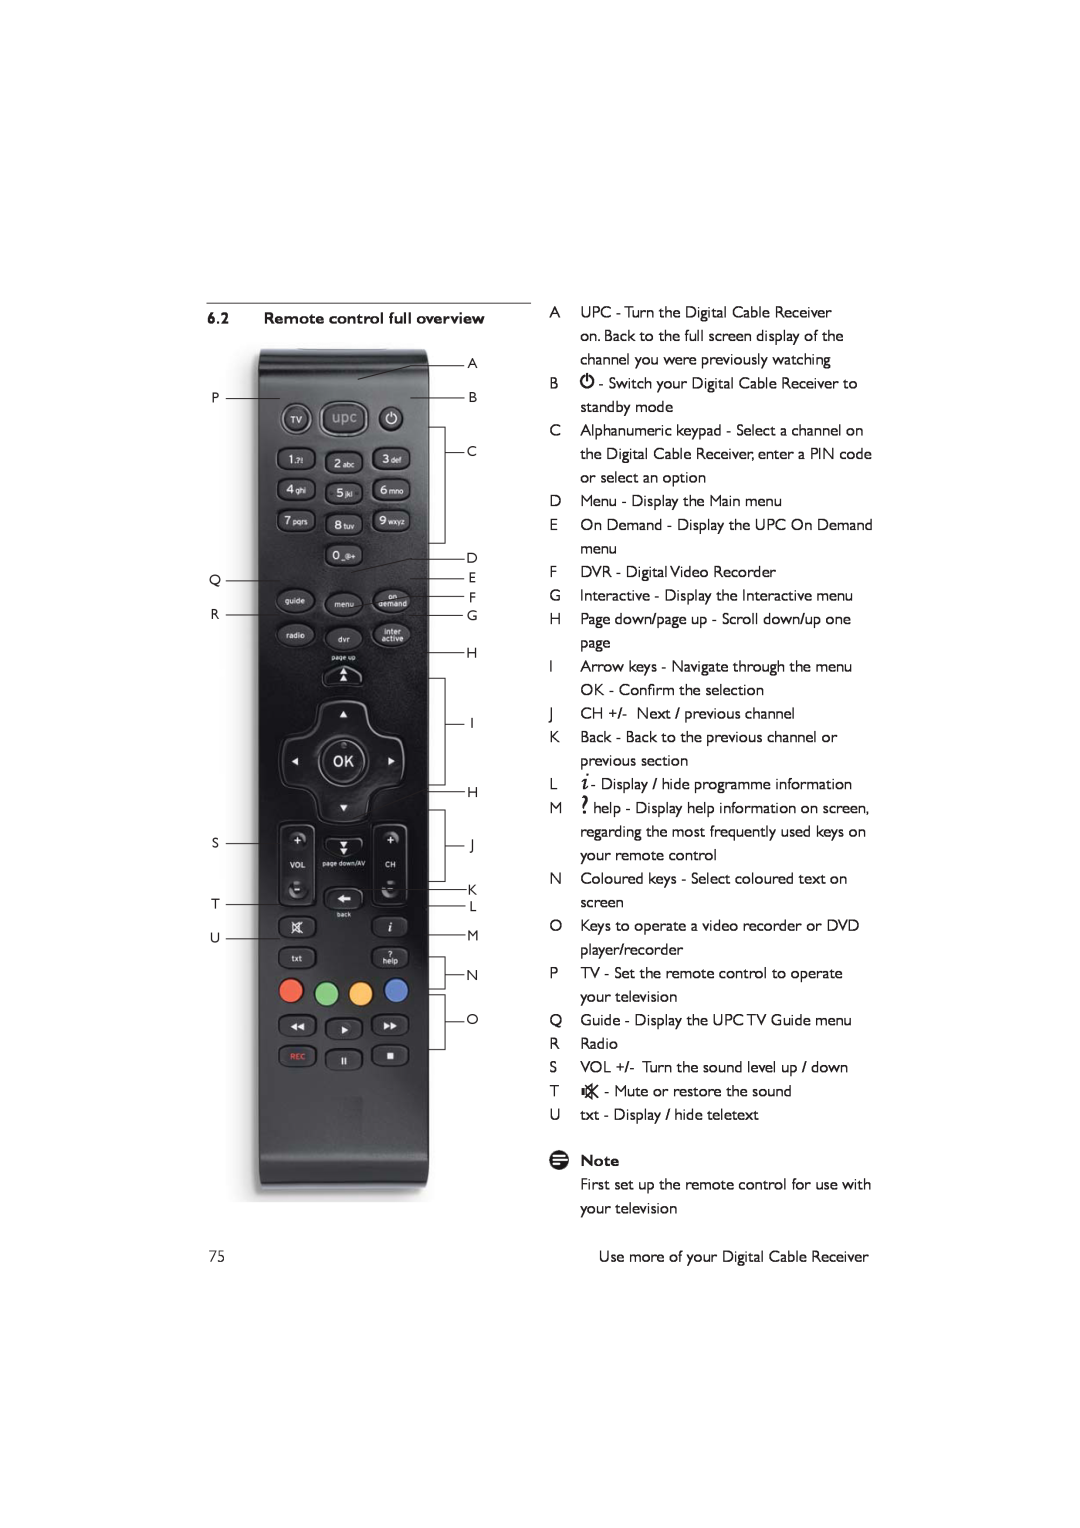 Philips DCR5012 manual 6.2Remote control full overview 